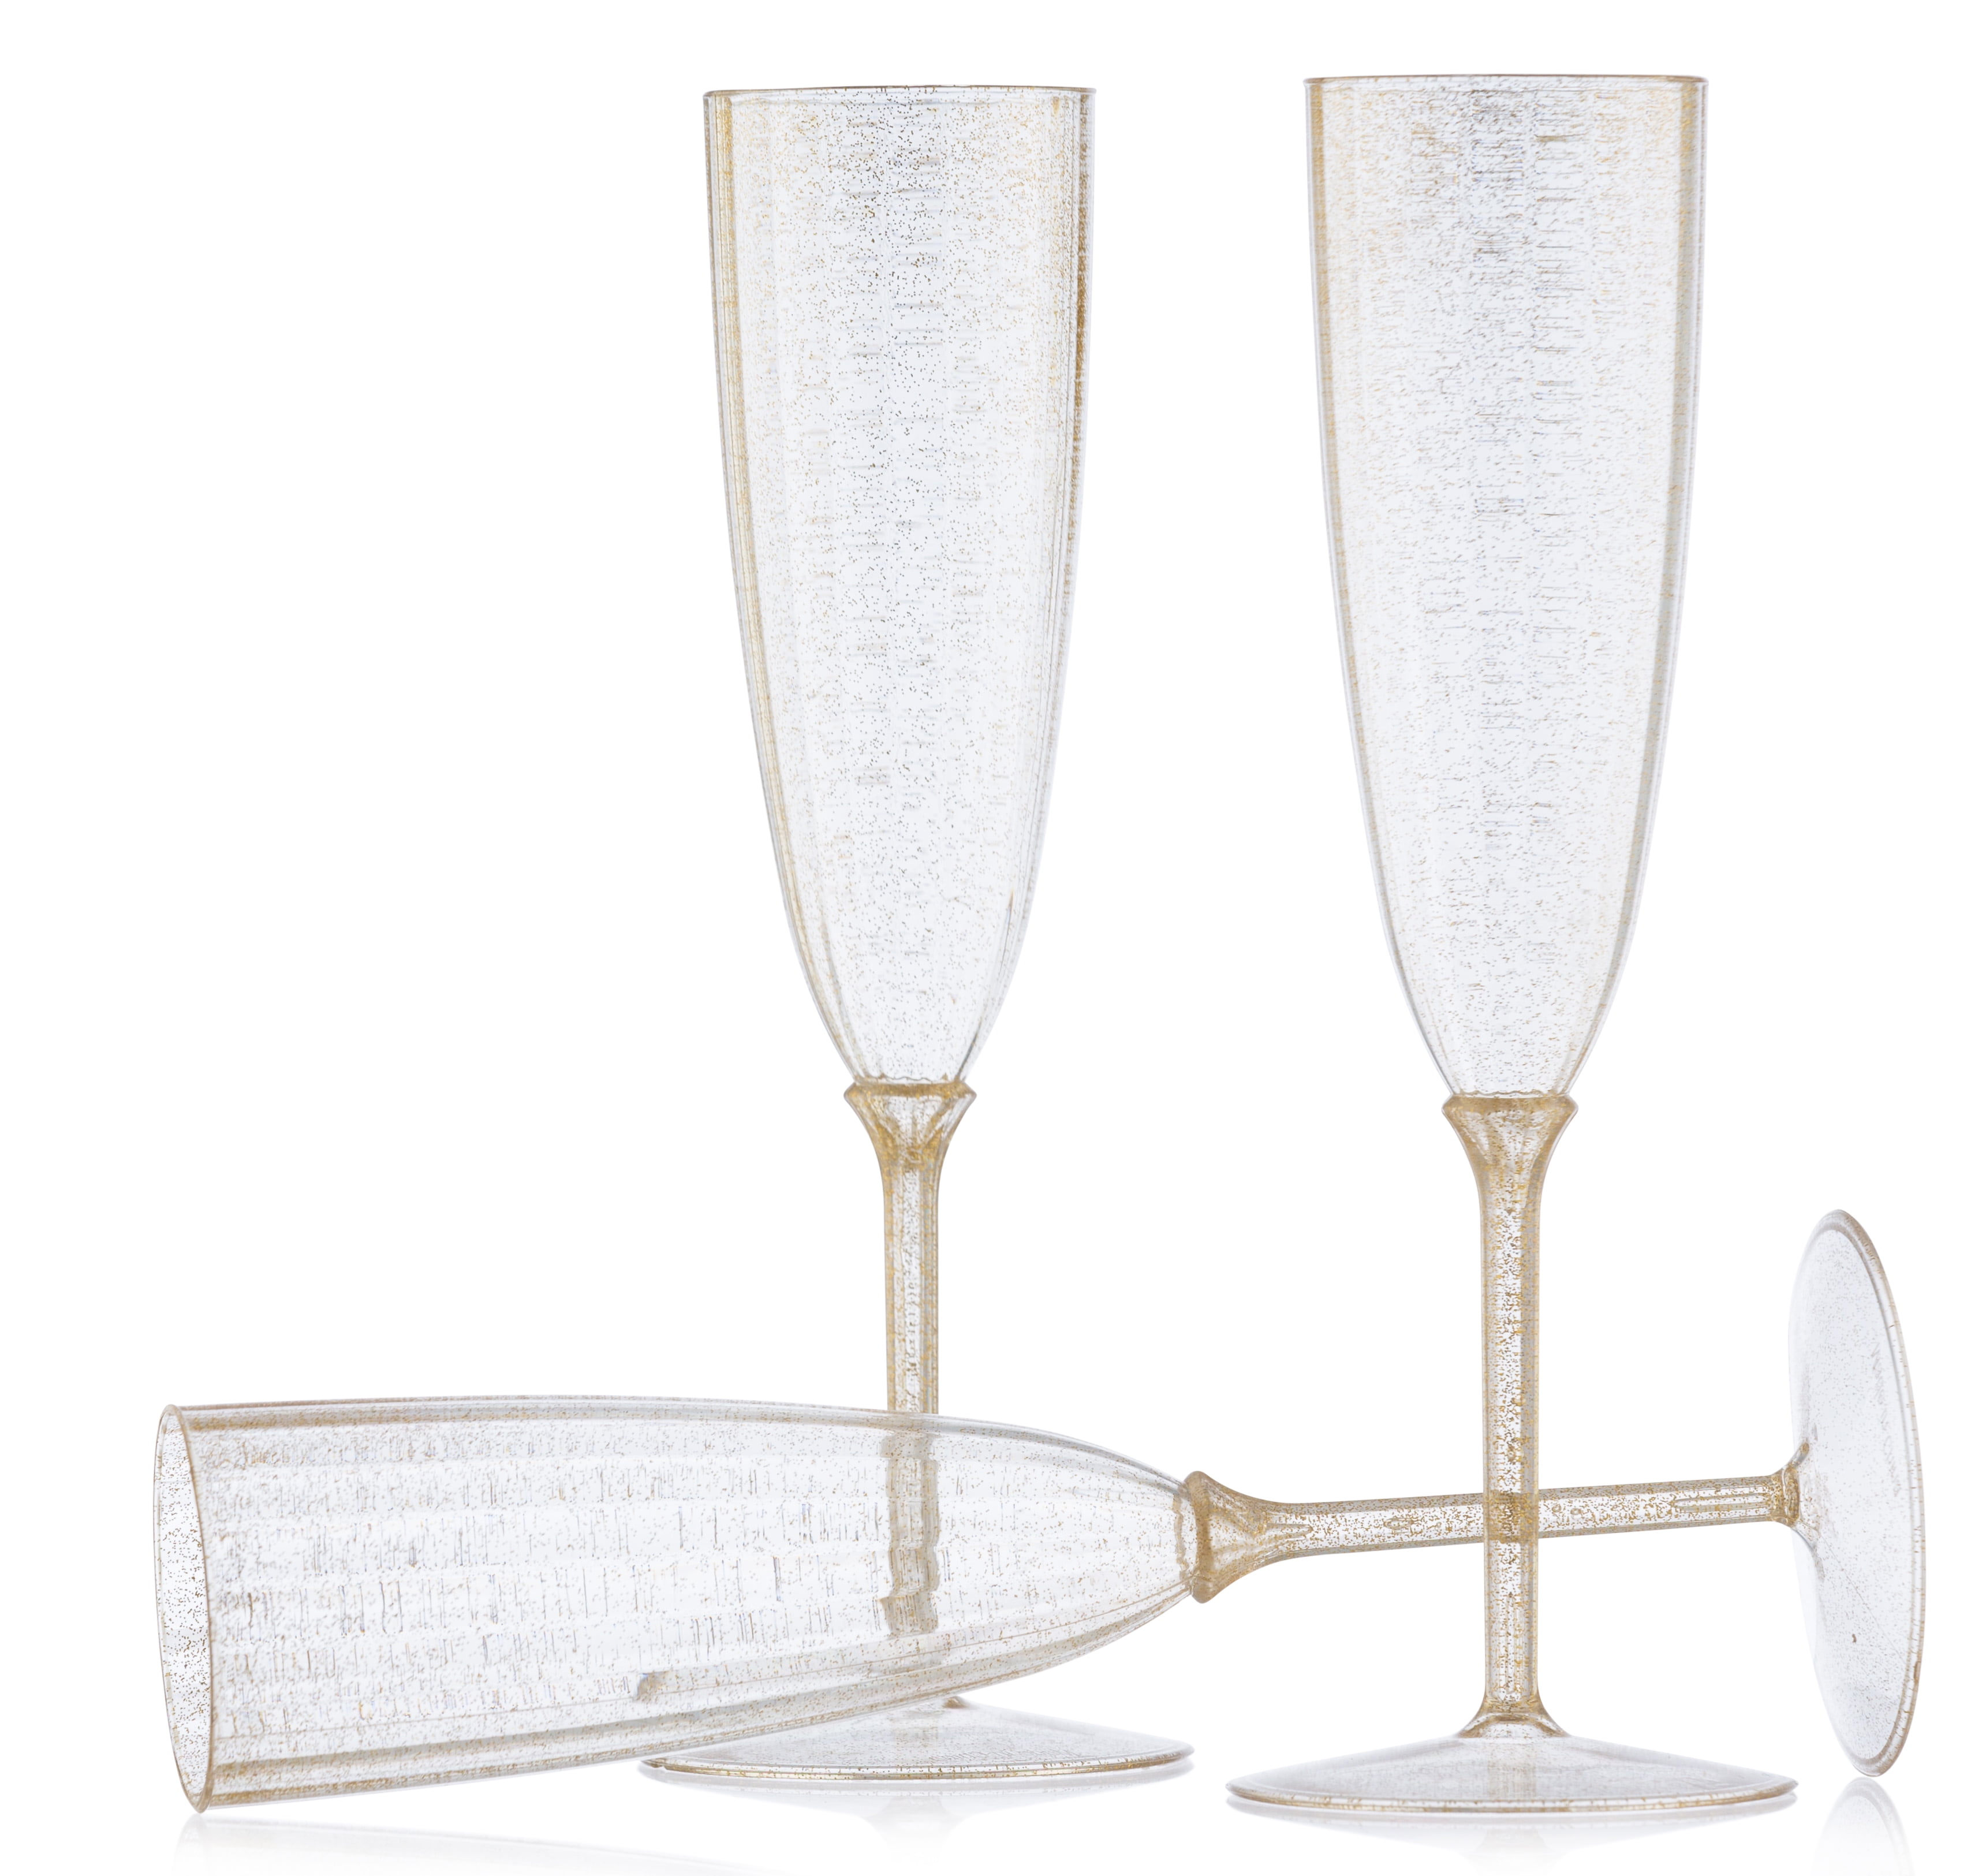 Plastic Champagne Flutes, Color Series Disposable Unbreakable Toasting  Glasses, Fancy & Shatterproof Champagne Glasses, Ideal For Wedding,  Birthday, Party, Easter - Temu